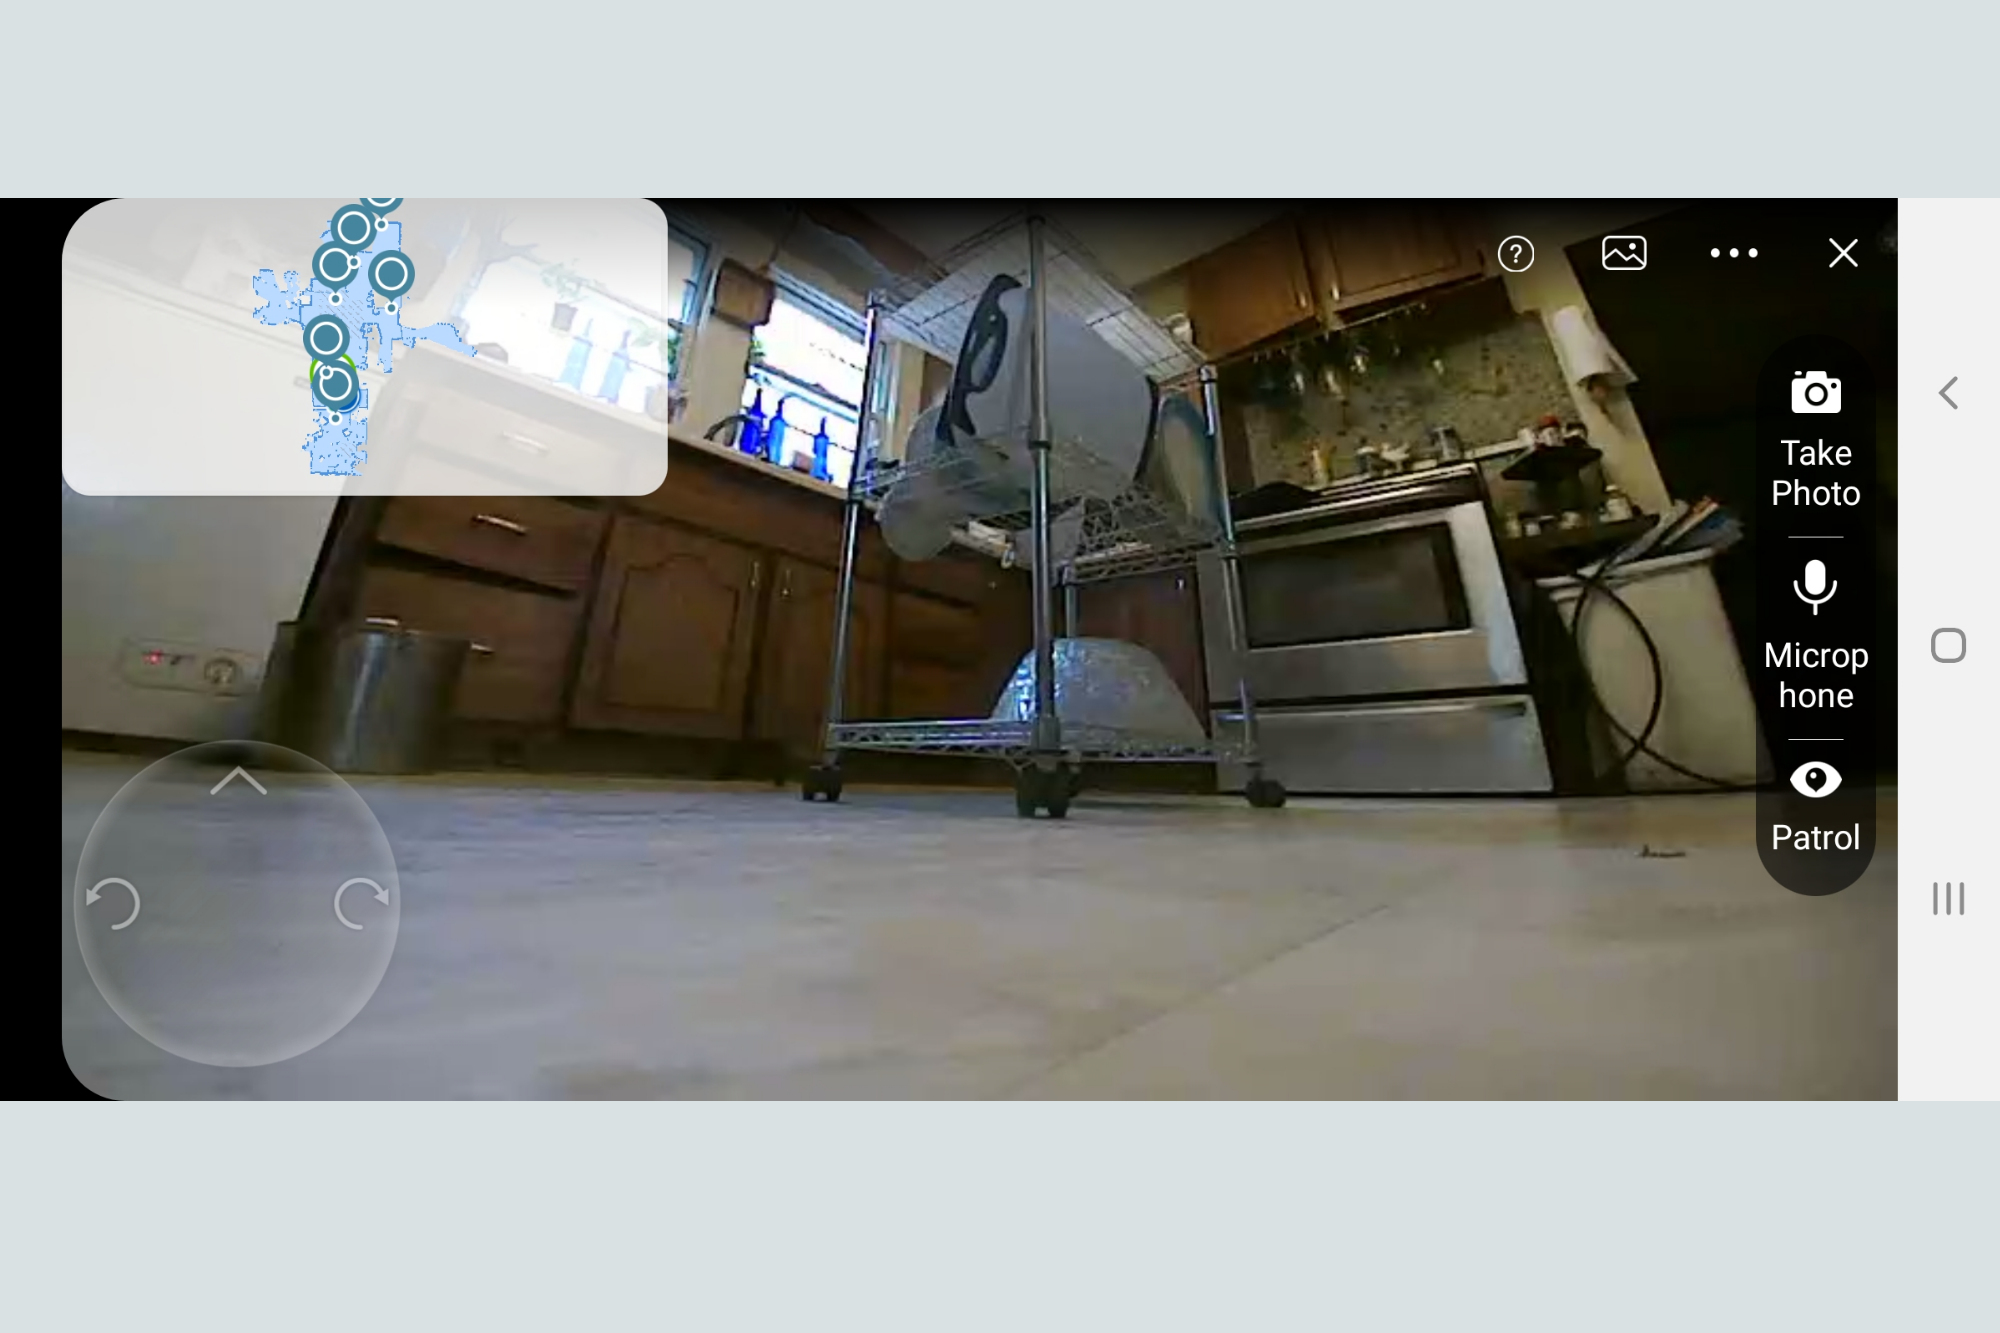 These Robot Vacuums Have Built-in Cameras, Here's What They Can Do Digital Trends